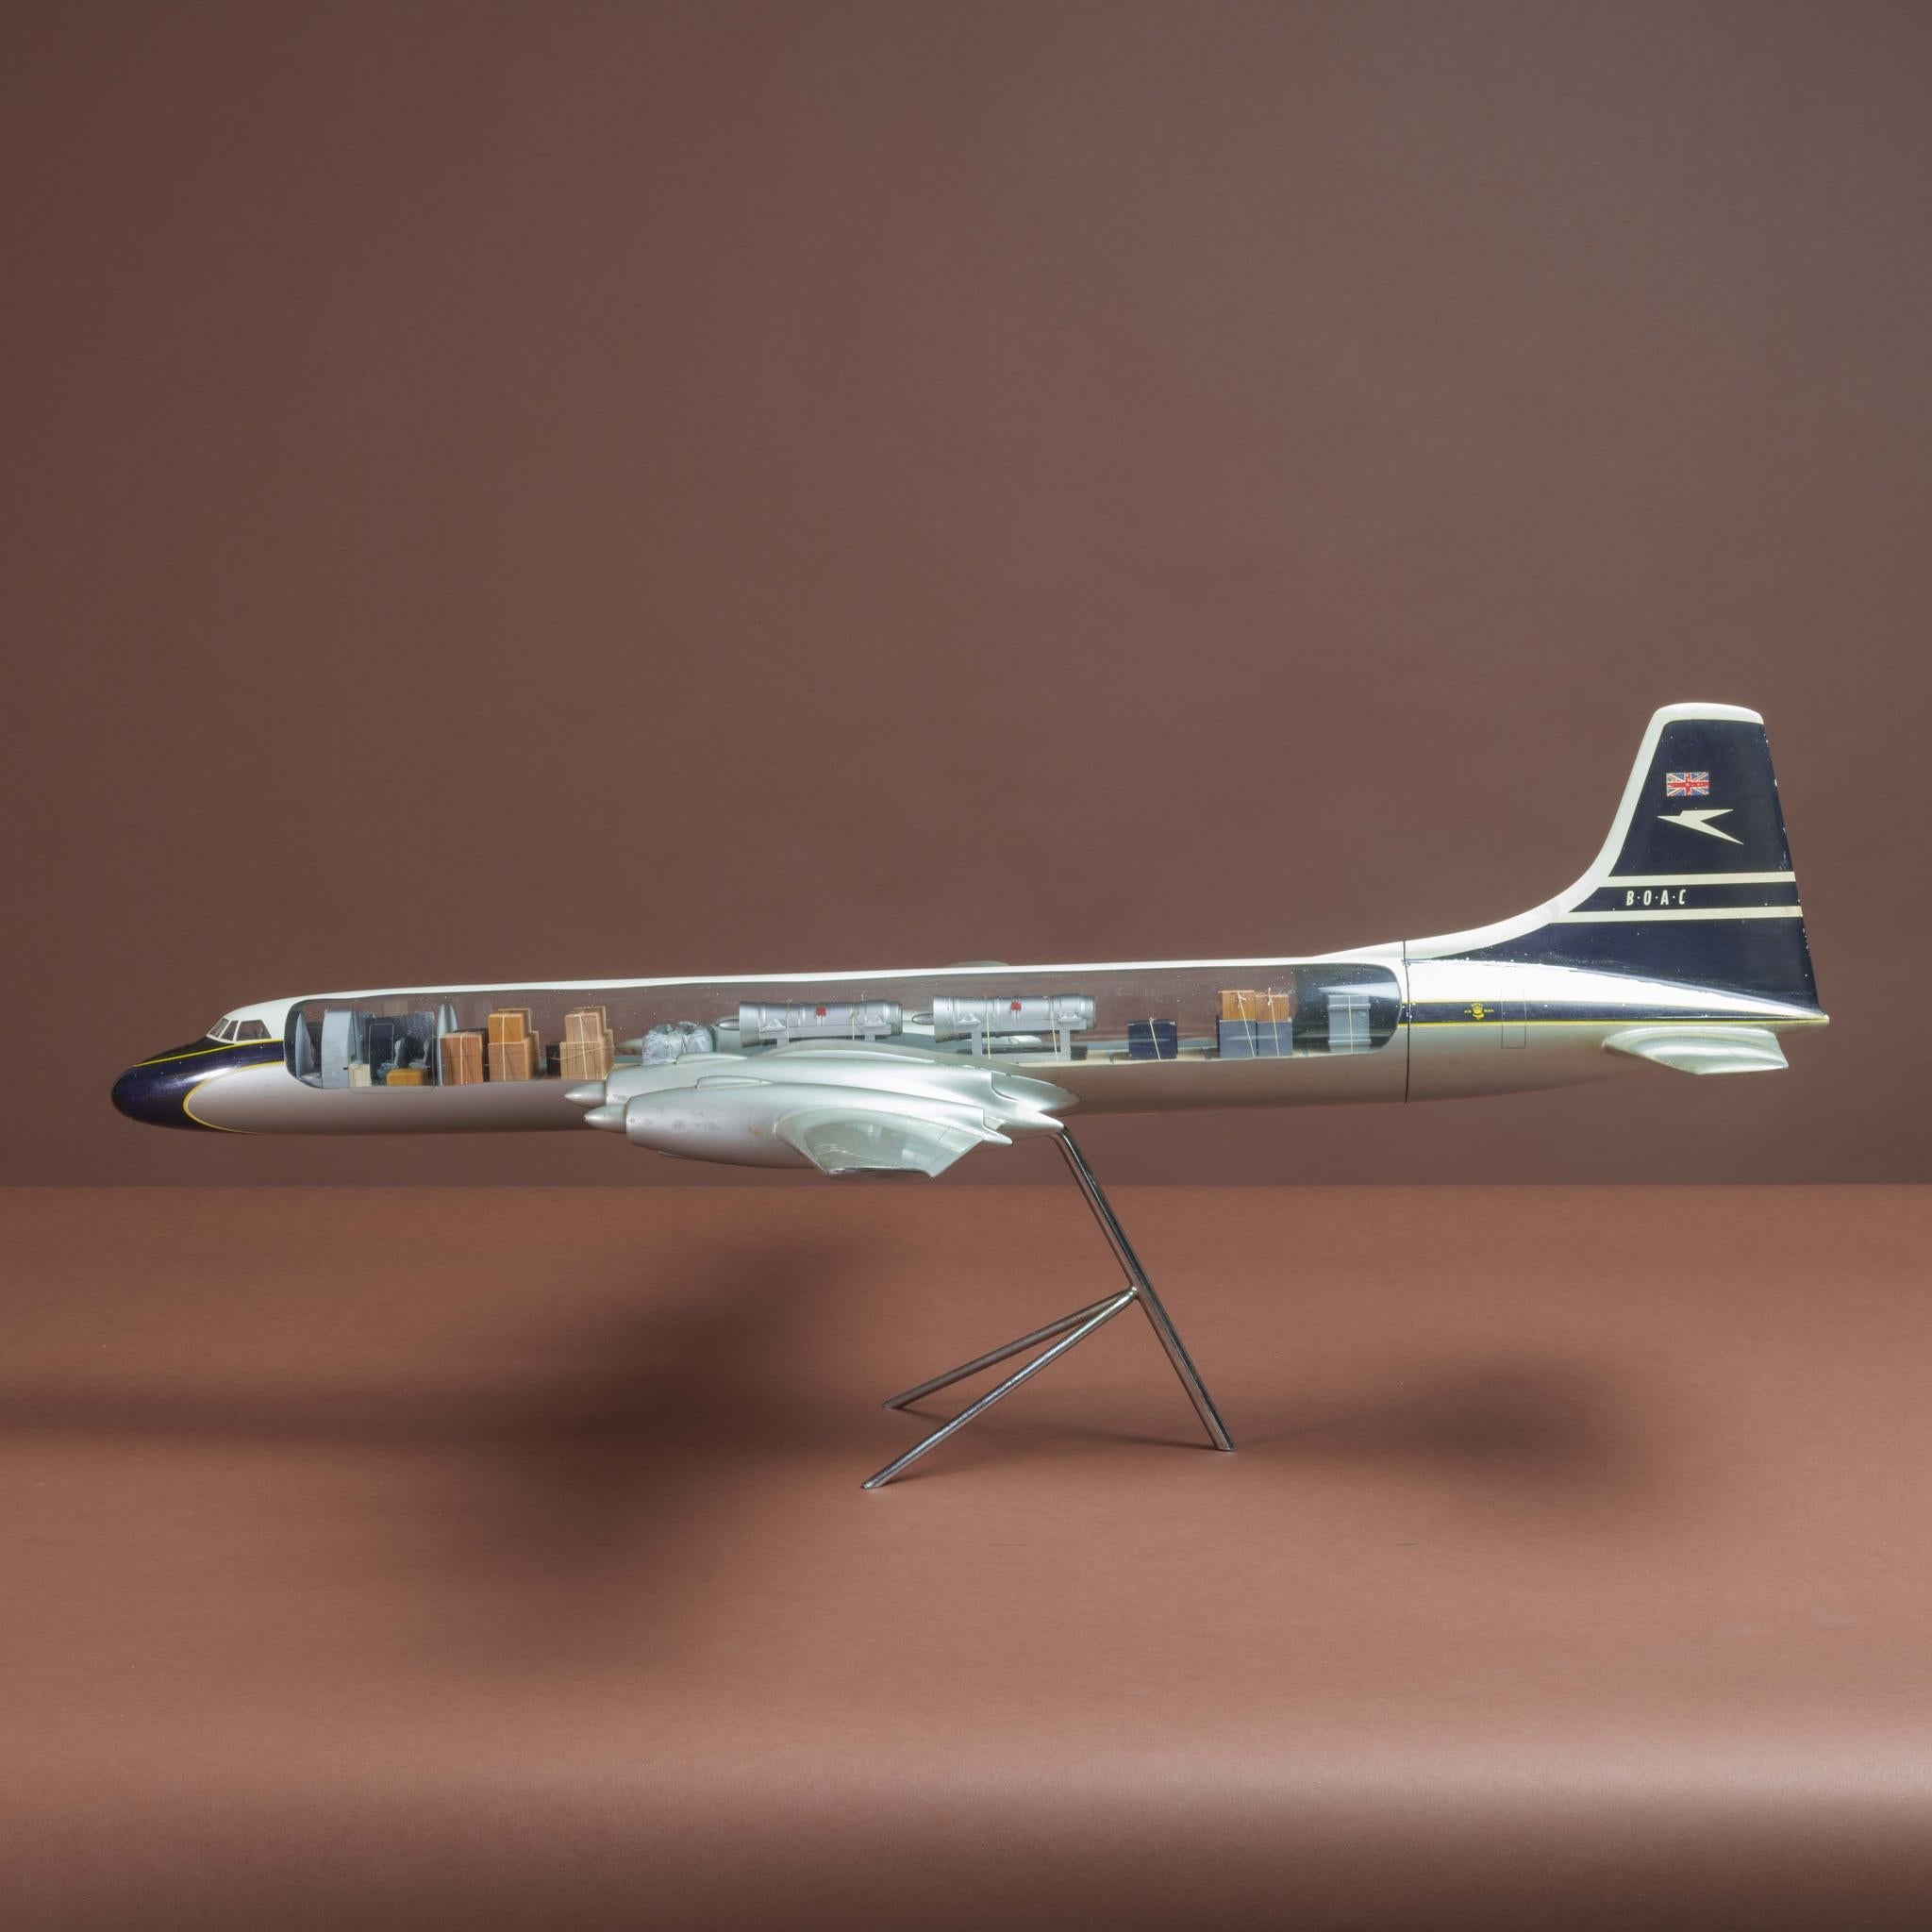 A wonderful and rare painted cut-away model of a Canadair CL-44D4-1 in BOAC livery, mounted on original stand.

Made for BOAC by Mastermodels Ltd of Feltham and presented, in about 1963, to a director of C.Claridge shipping agents who once